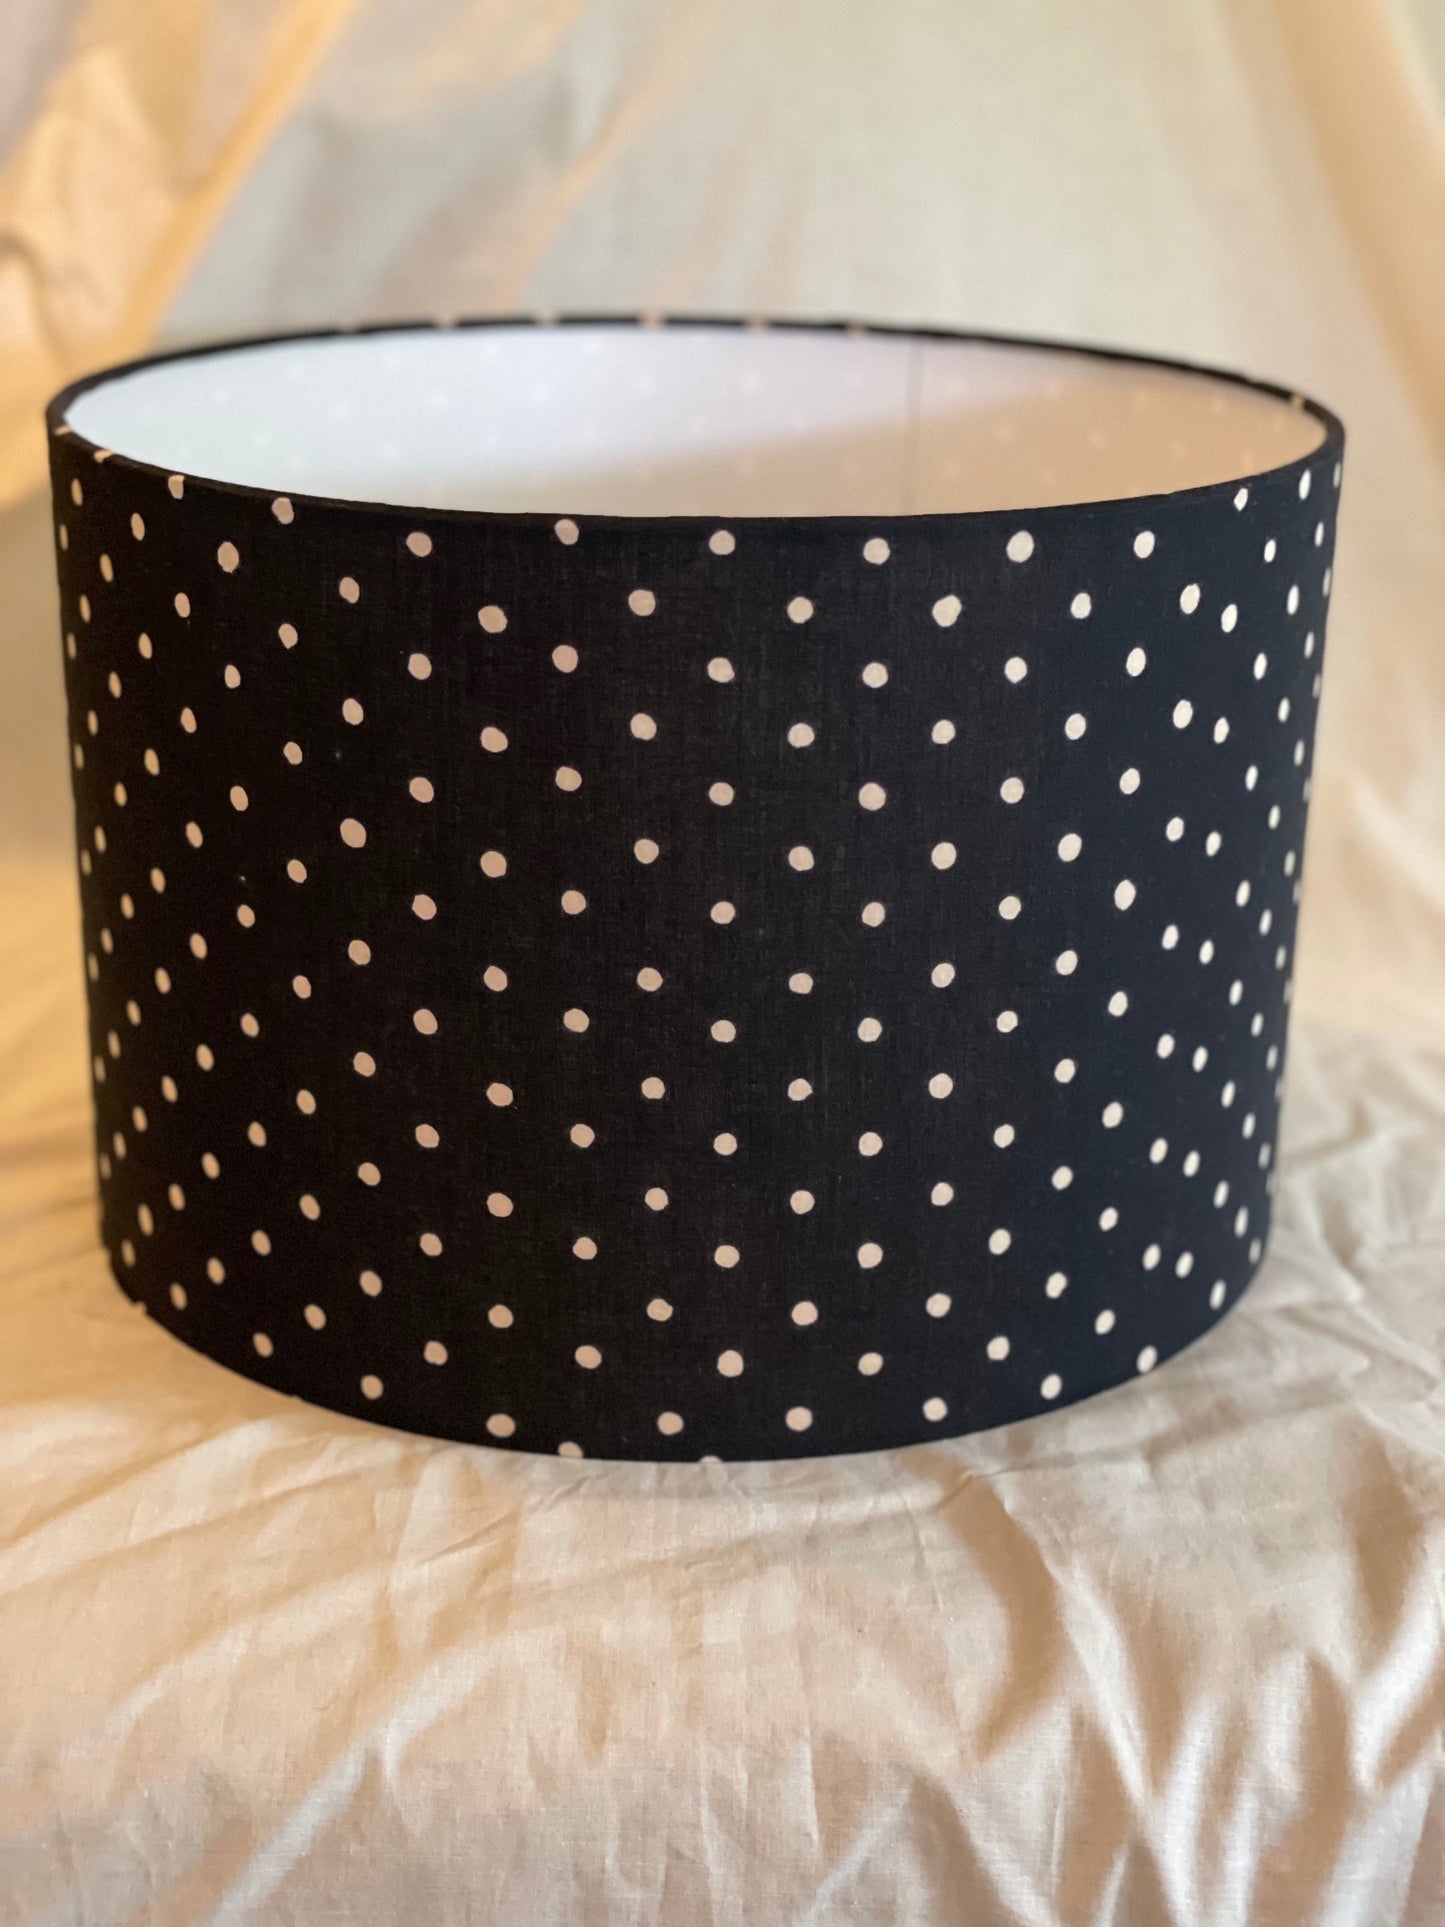 12 Inch Drum Lampshade. Indian Hand Block Print. Black with Gentle White Polka Dot.